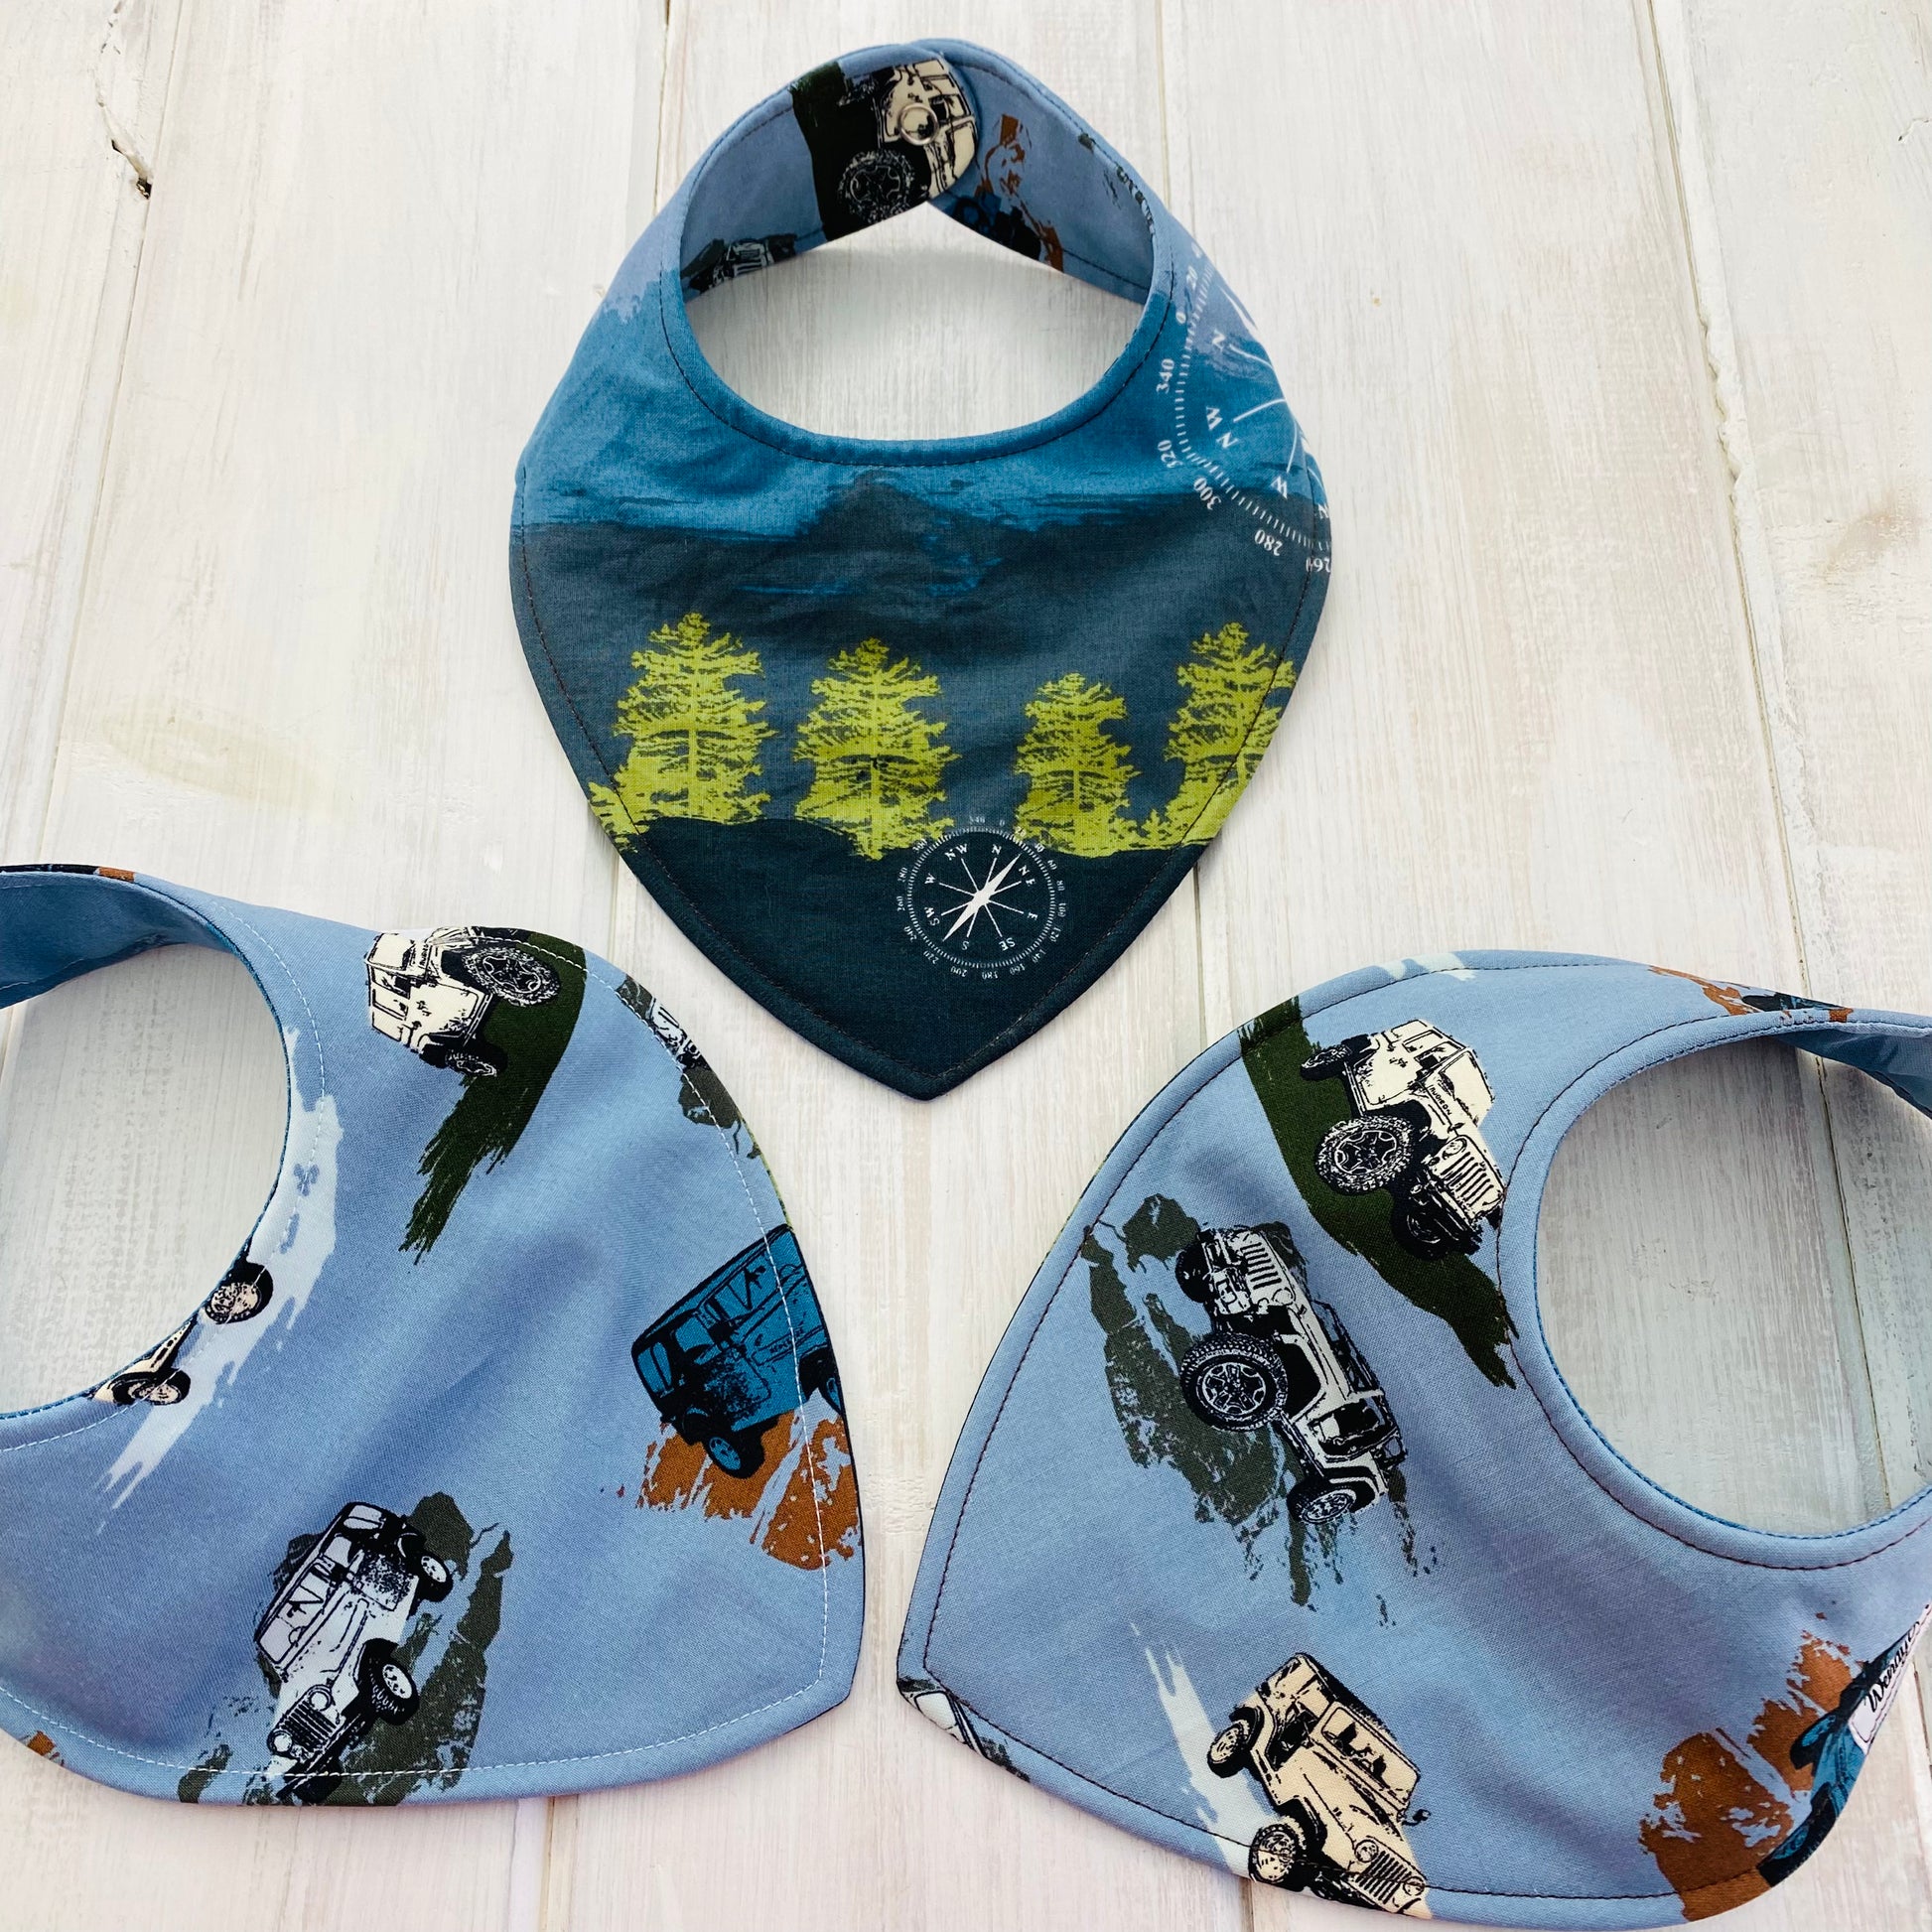 Jeep baby bib, with reverse side in blue gradient forest scene.